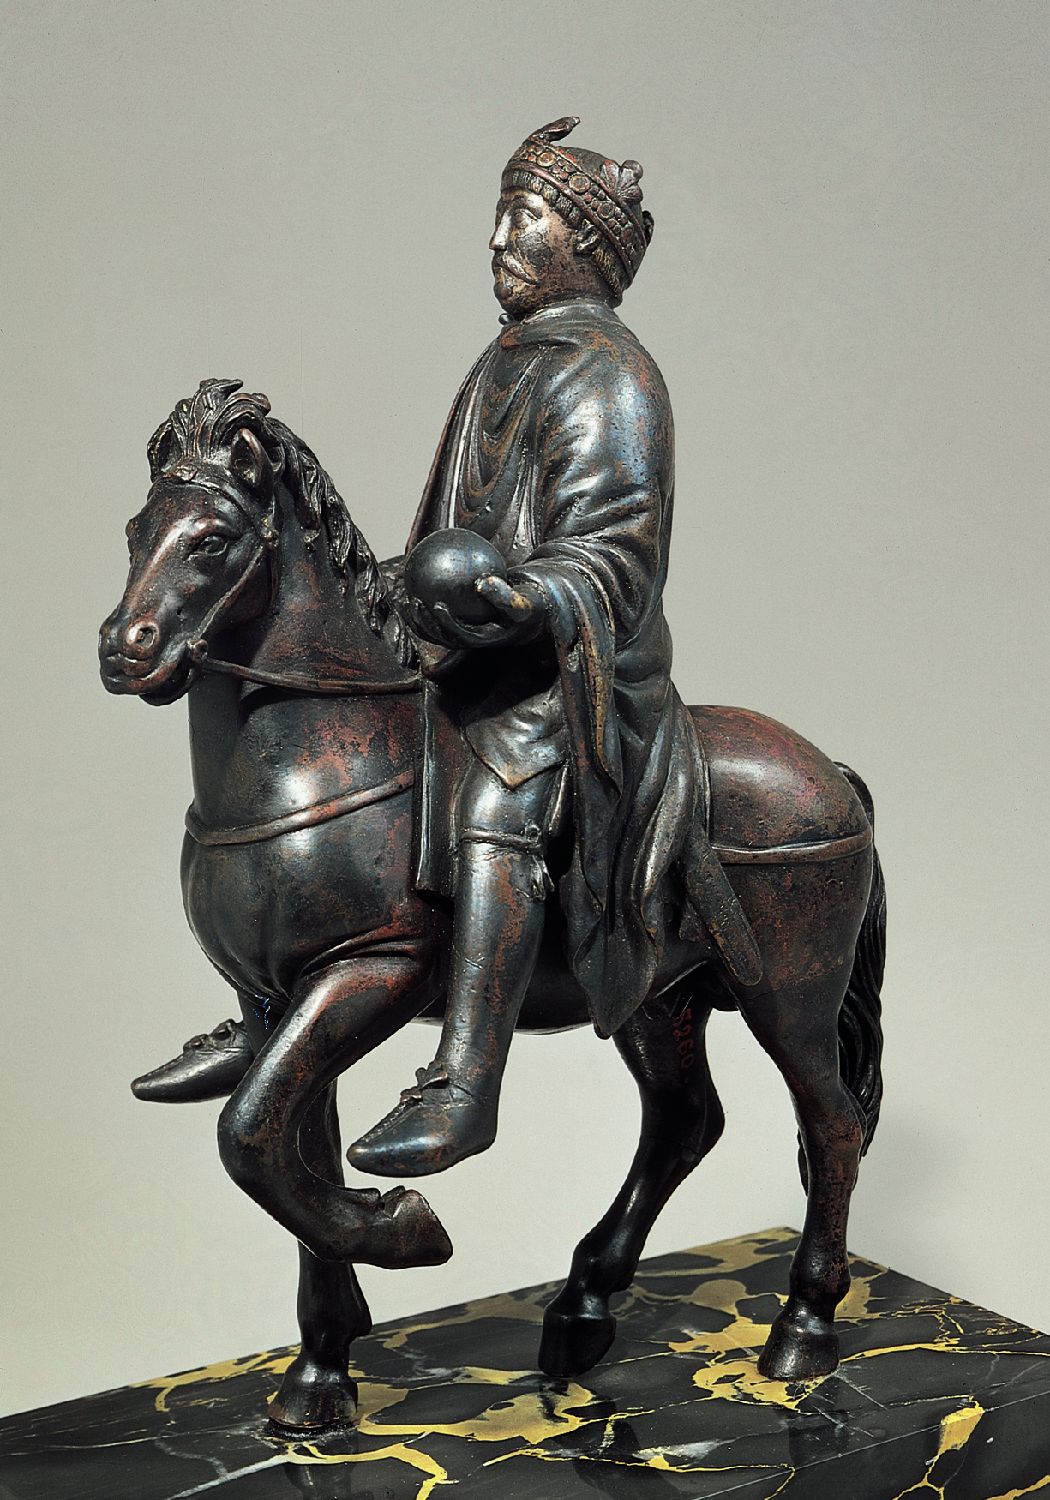 Equestrian Statuette of Charlemagne or Charles the Bald by Unknown Artist - 9th century - 25 cm Musée du Louvre